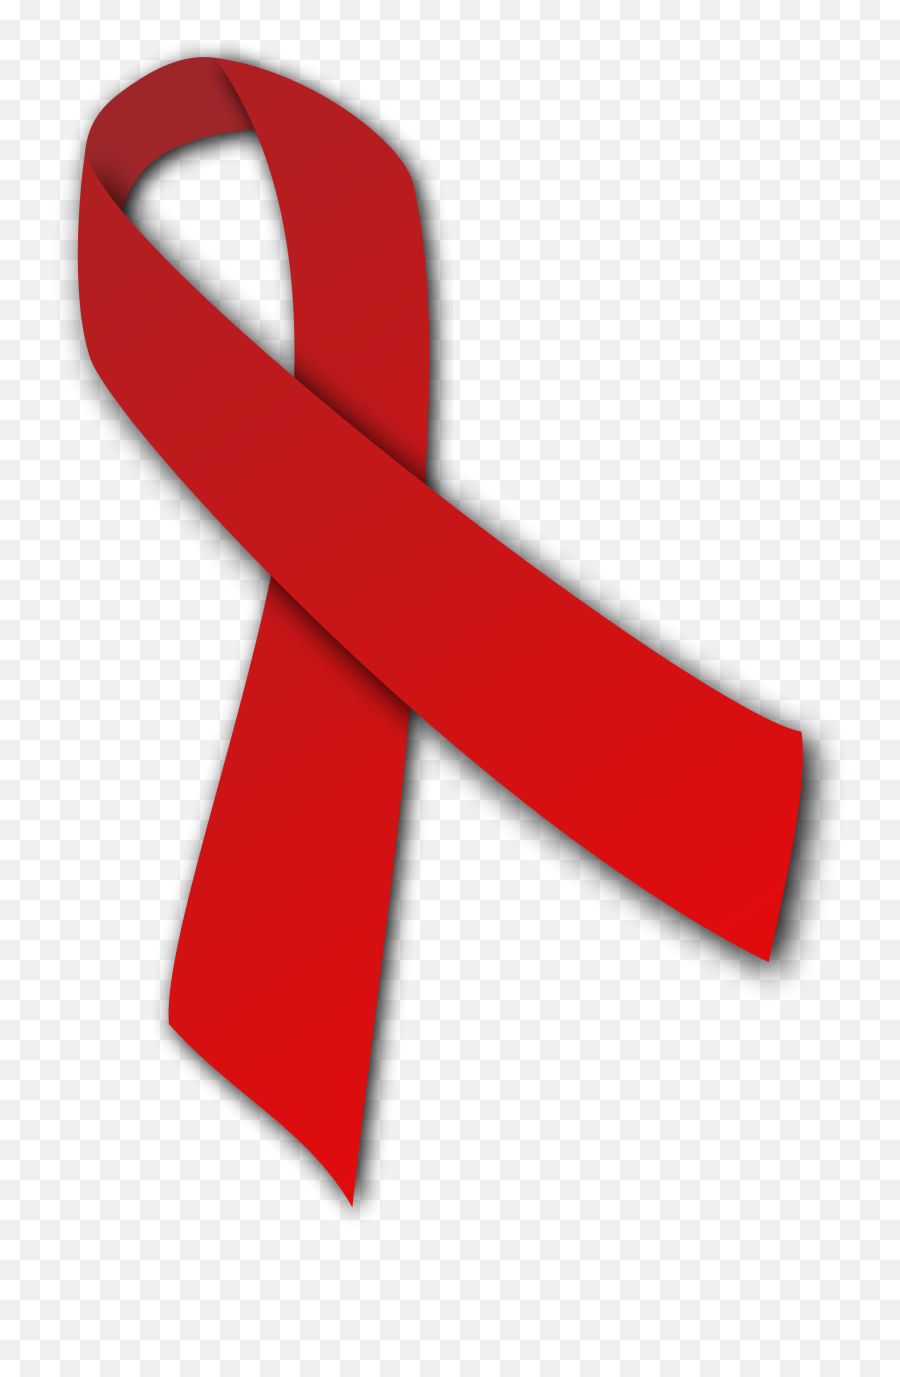 Red Ribbon Png Image Background - Clip Art Aids Ribbon,Red Ribbon Transparent Background